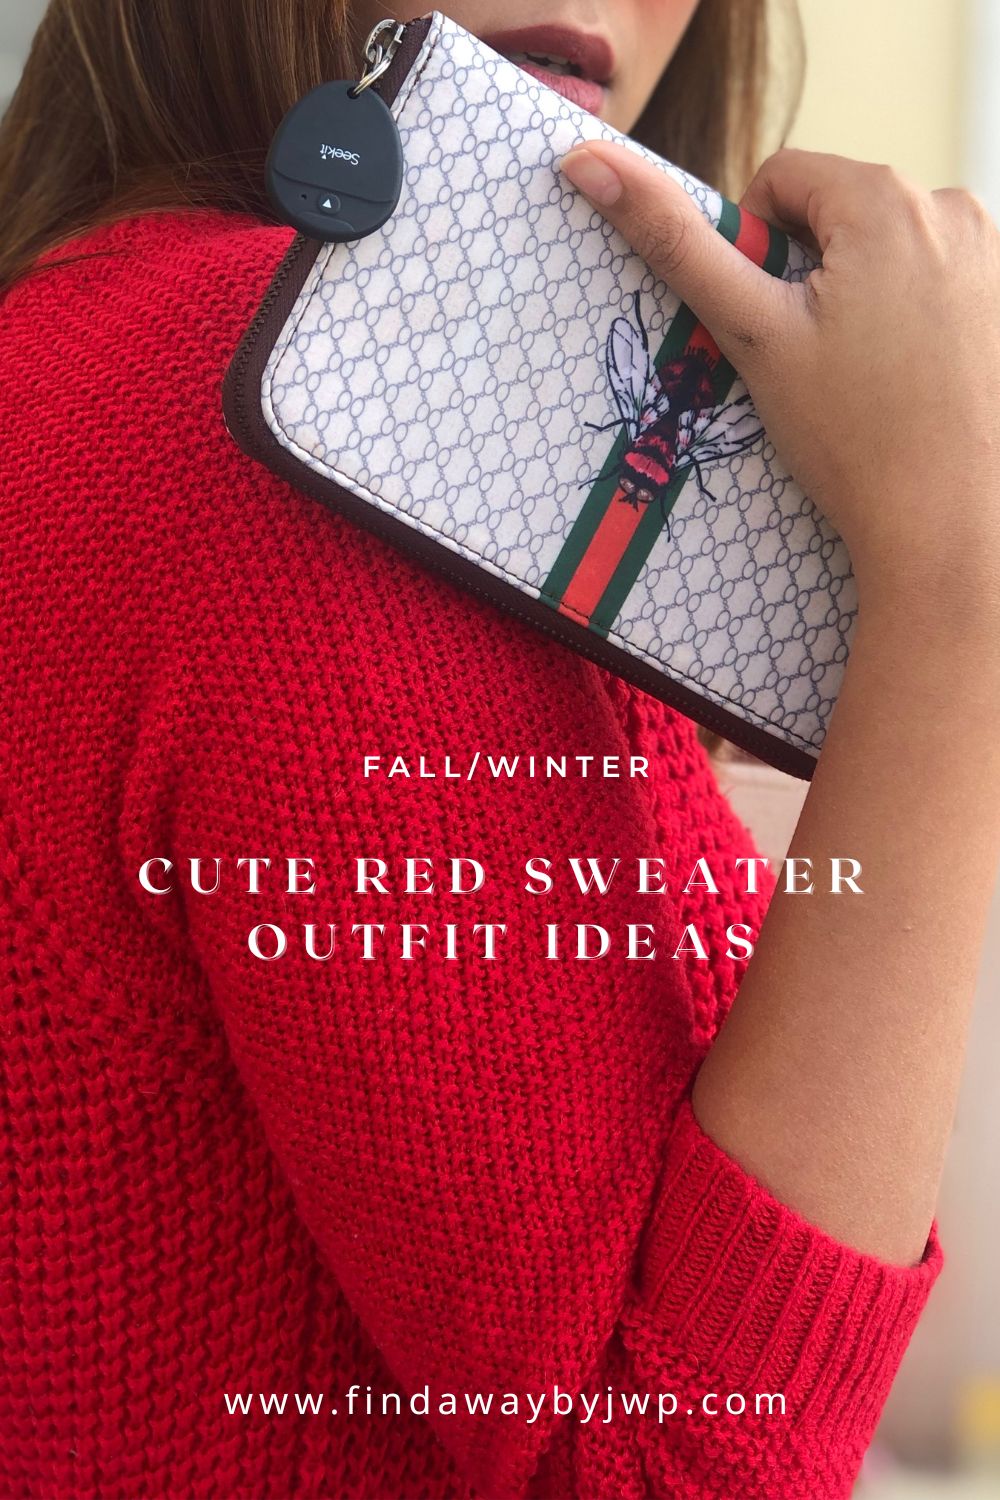 Cute red sweater outfit ideas - Find A Way by JWP